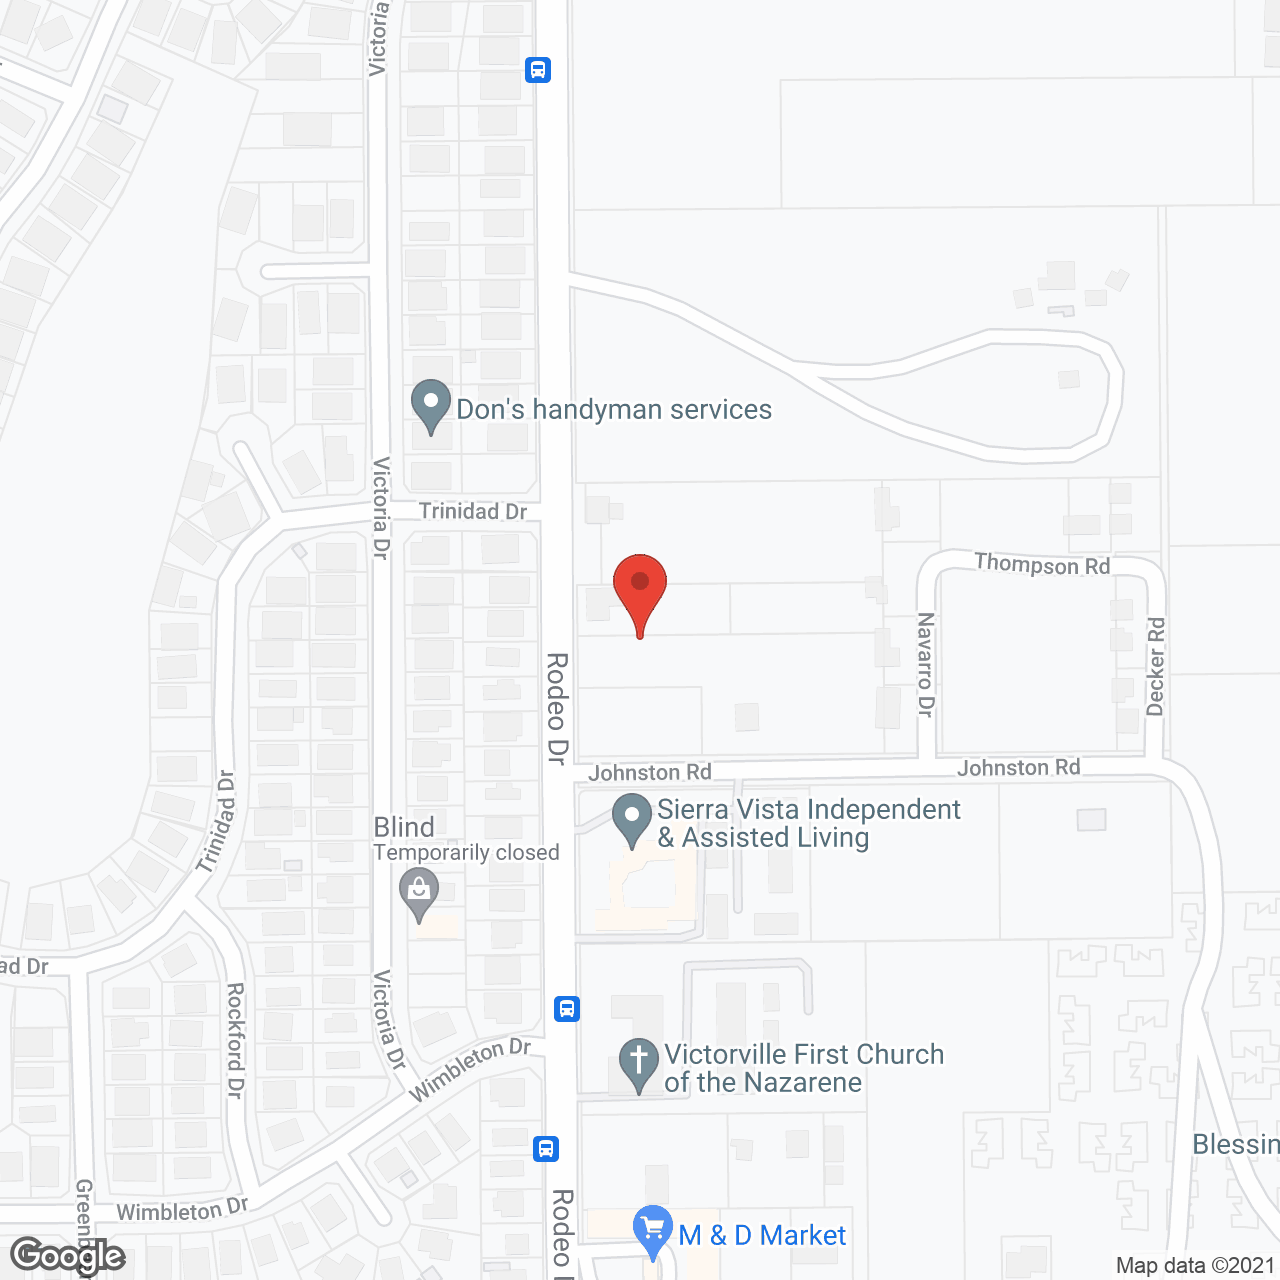 Sierra Vista Independent & Assisted Living in google map